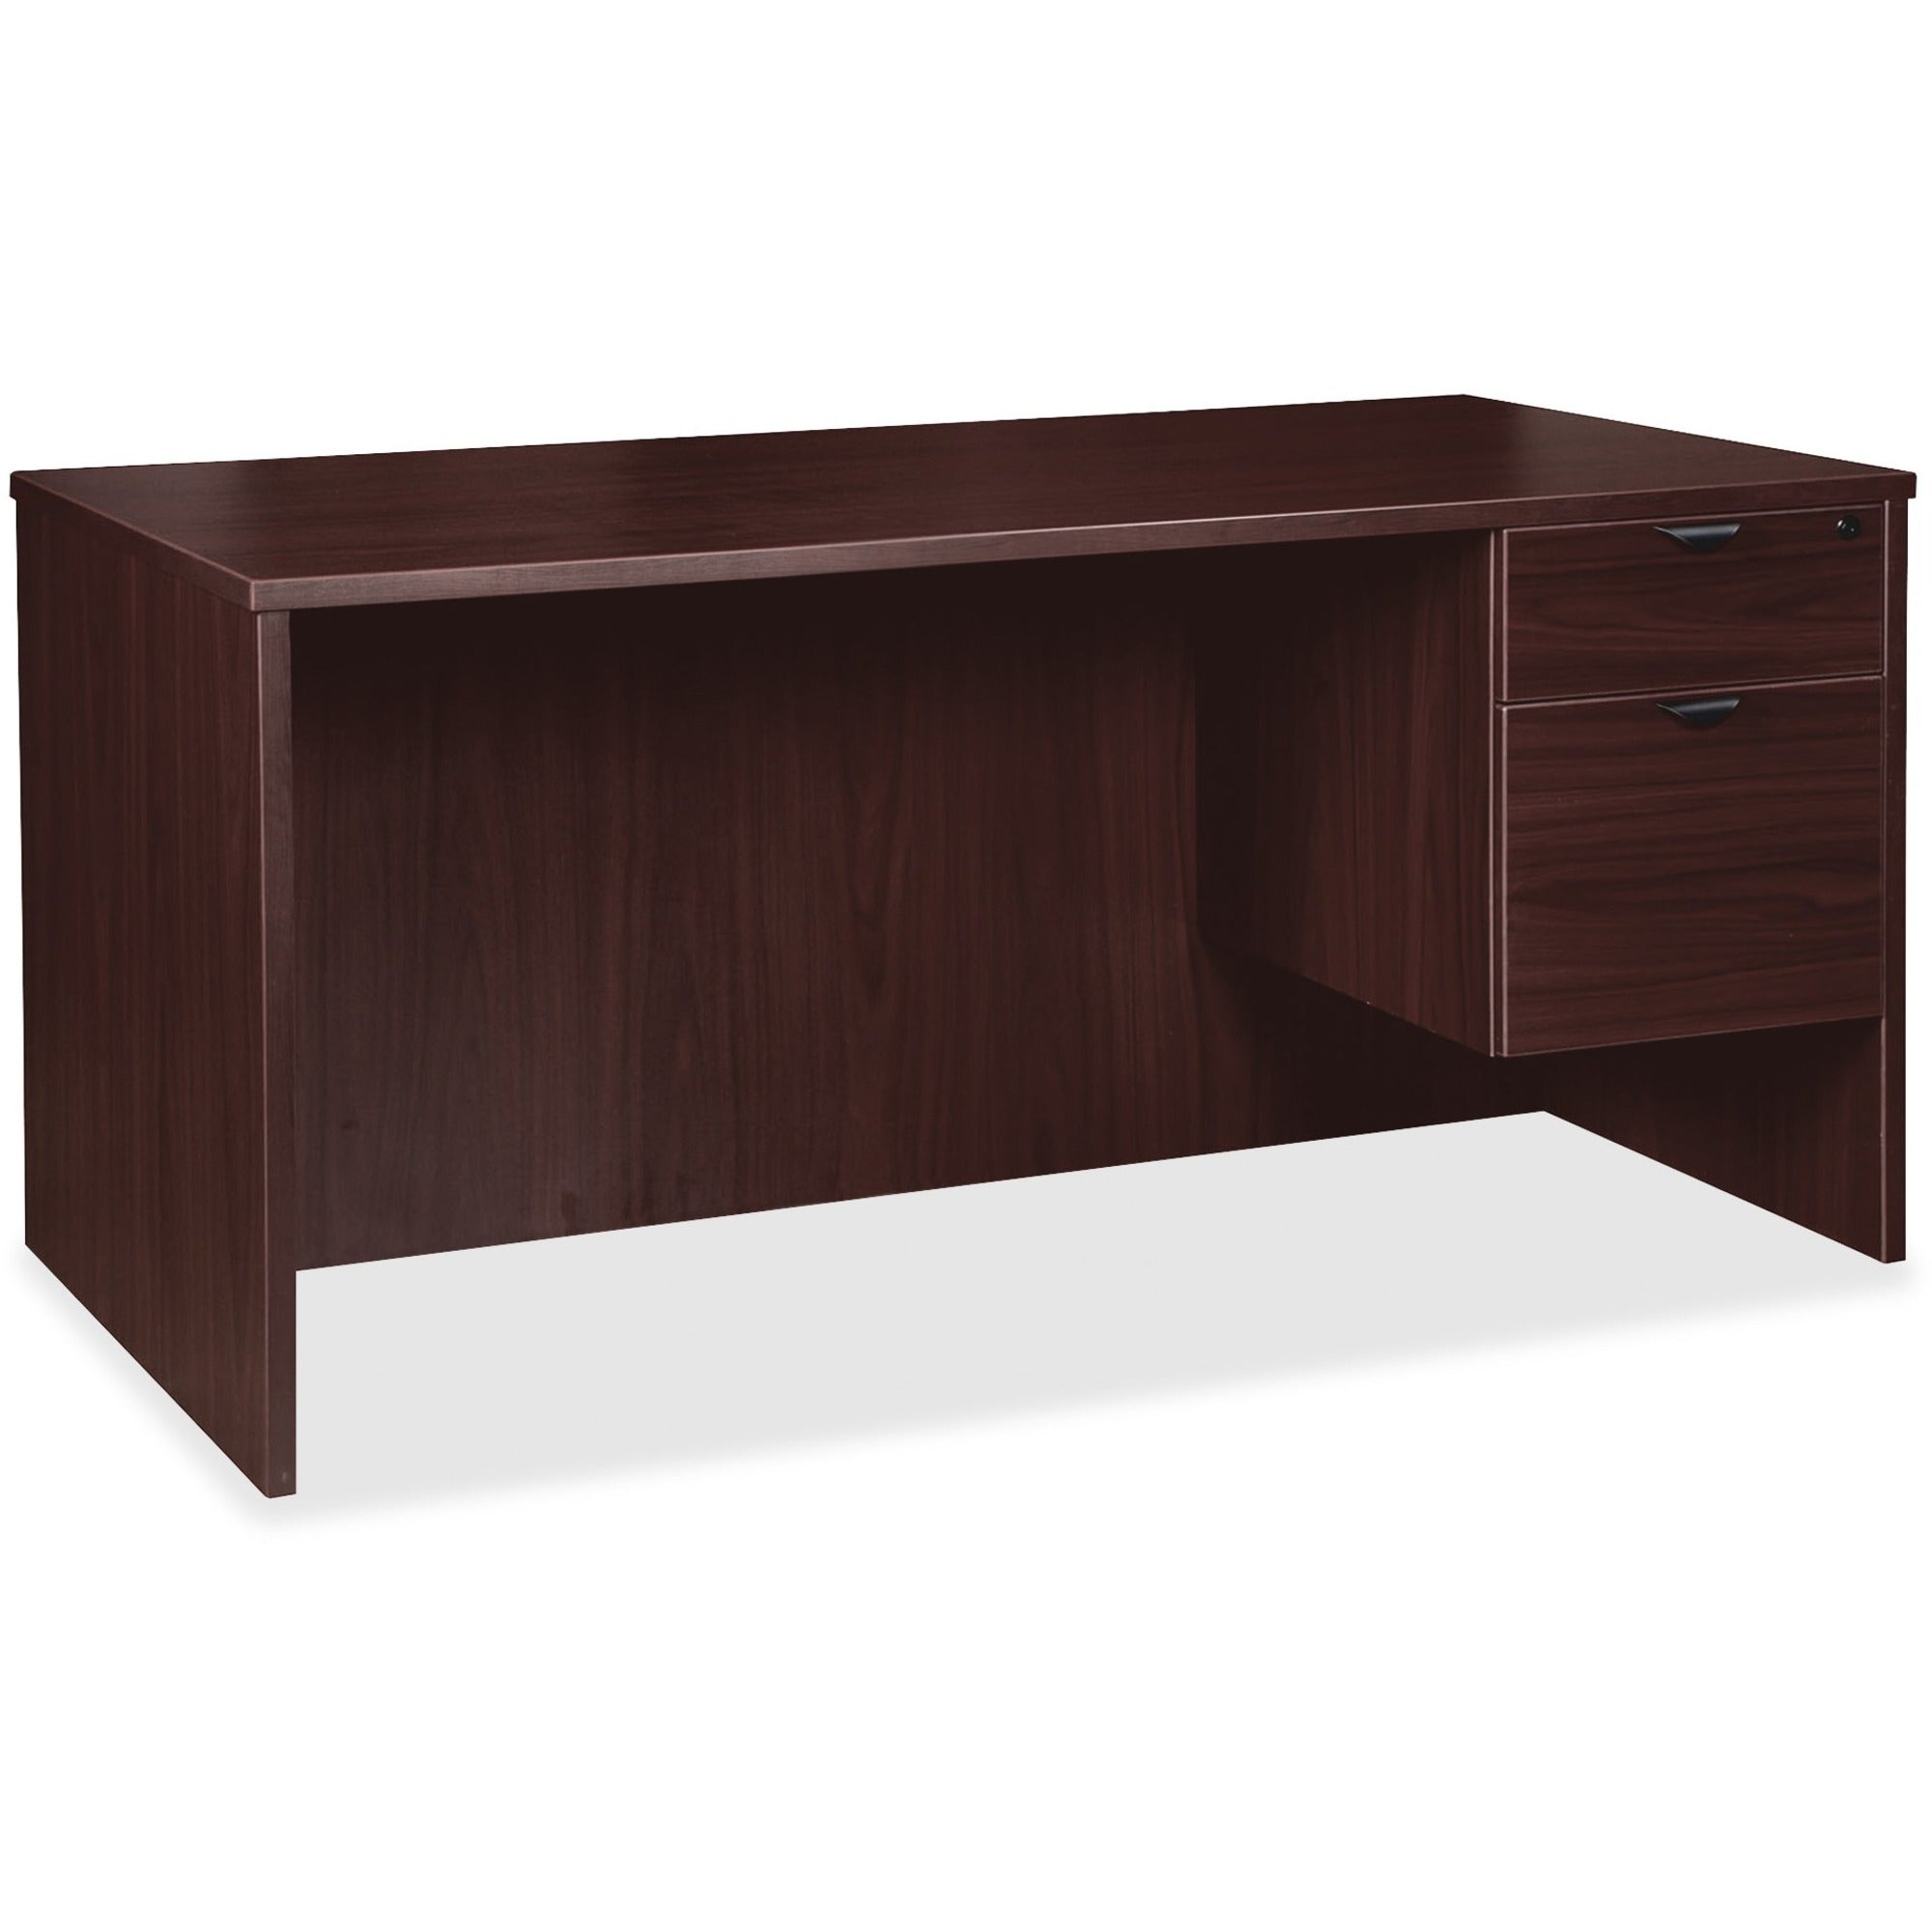 lorell-prominence-20-3-4-right-pedestal-desk-1-top-66-x-3029-2-x-file-box-drawers-single-pedestal-on-right-side-band-edge-material-particleboard-finish-espresso-laminate-thermofused-melamine-tfm_llrpd3066qres - 1